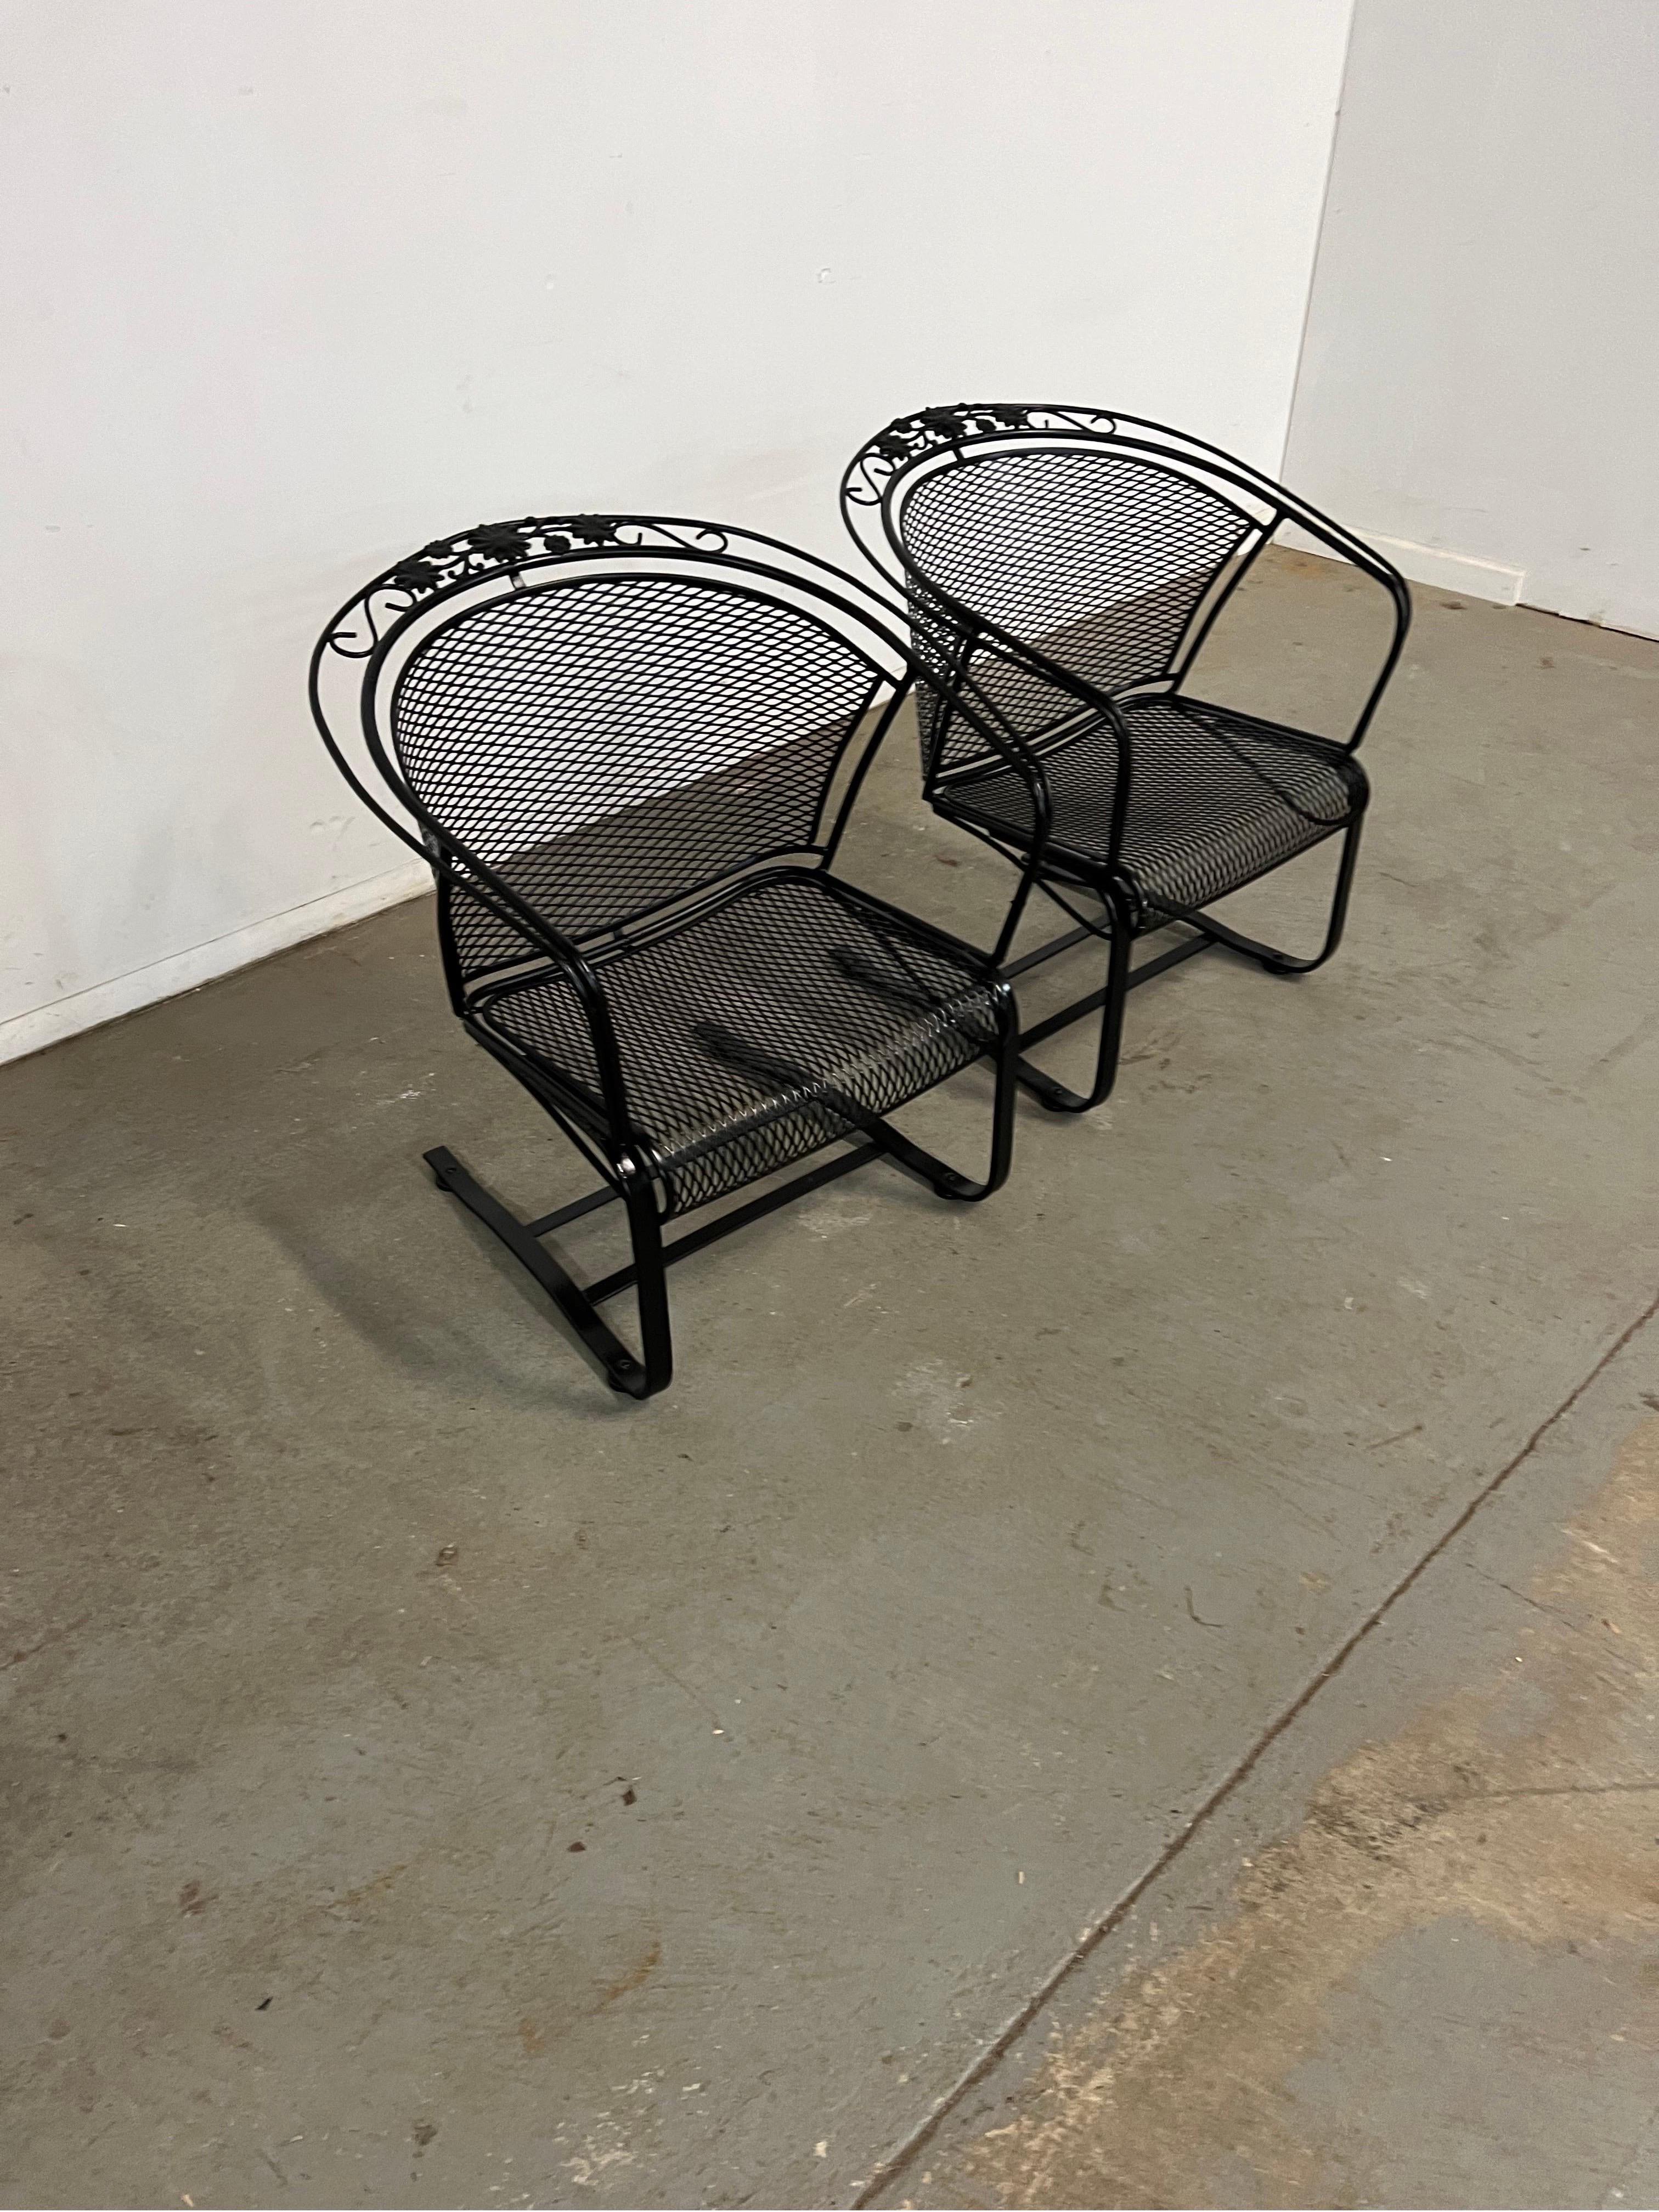 Set of 2 Mid-Century Modern Salterini Curve Back Cantilever/Springer Outdoor Arm Chairs
Offered is a Vintage Mid-Century Salterini Curve Back Outdoor Cantilever/Springer Arm Chair in the style of Salterini(circa 1960's). Features enameled and woven